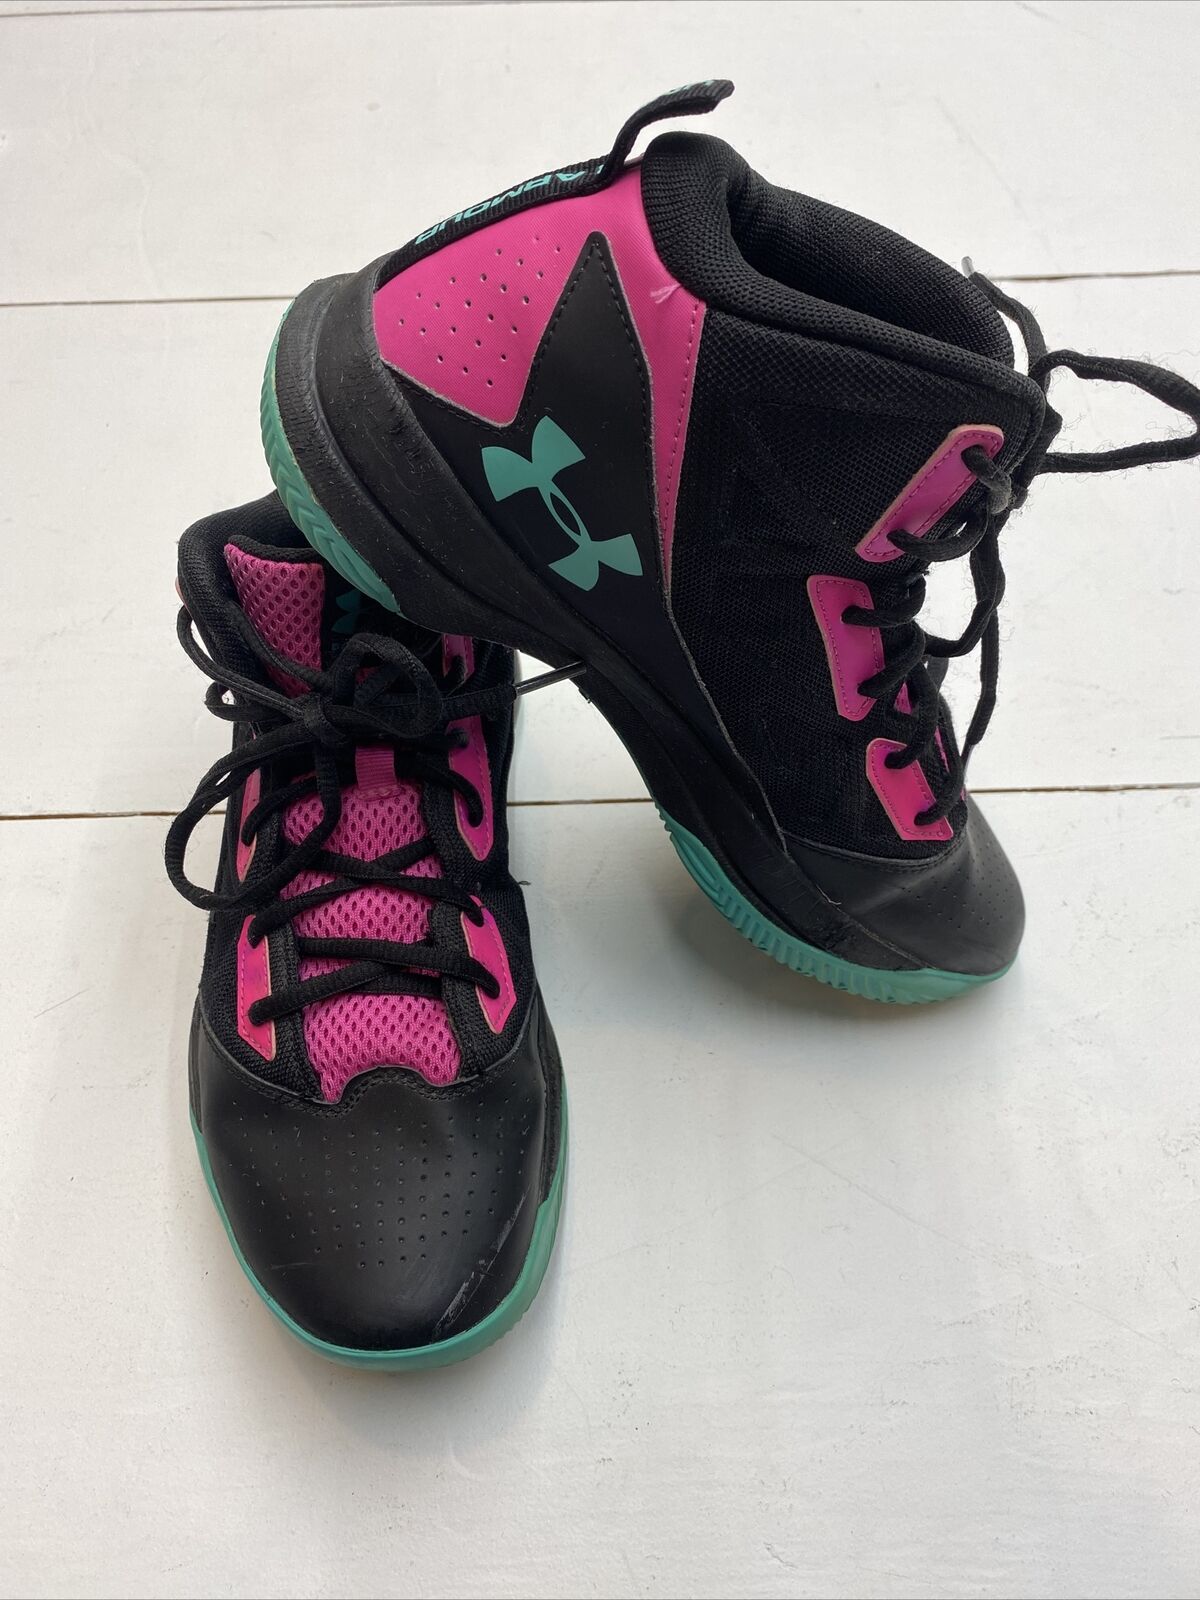 Under Armour 1274069-001 Pink Black And Teal Basketball Shoes Size 7Y *